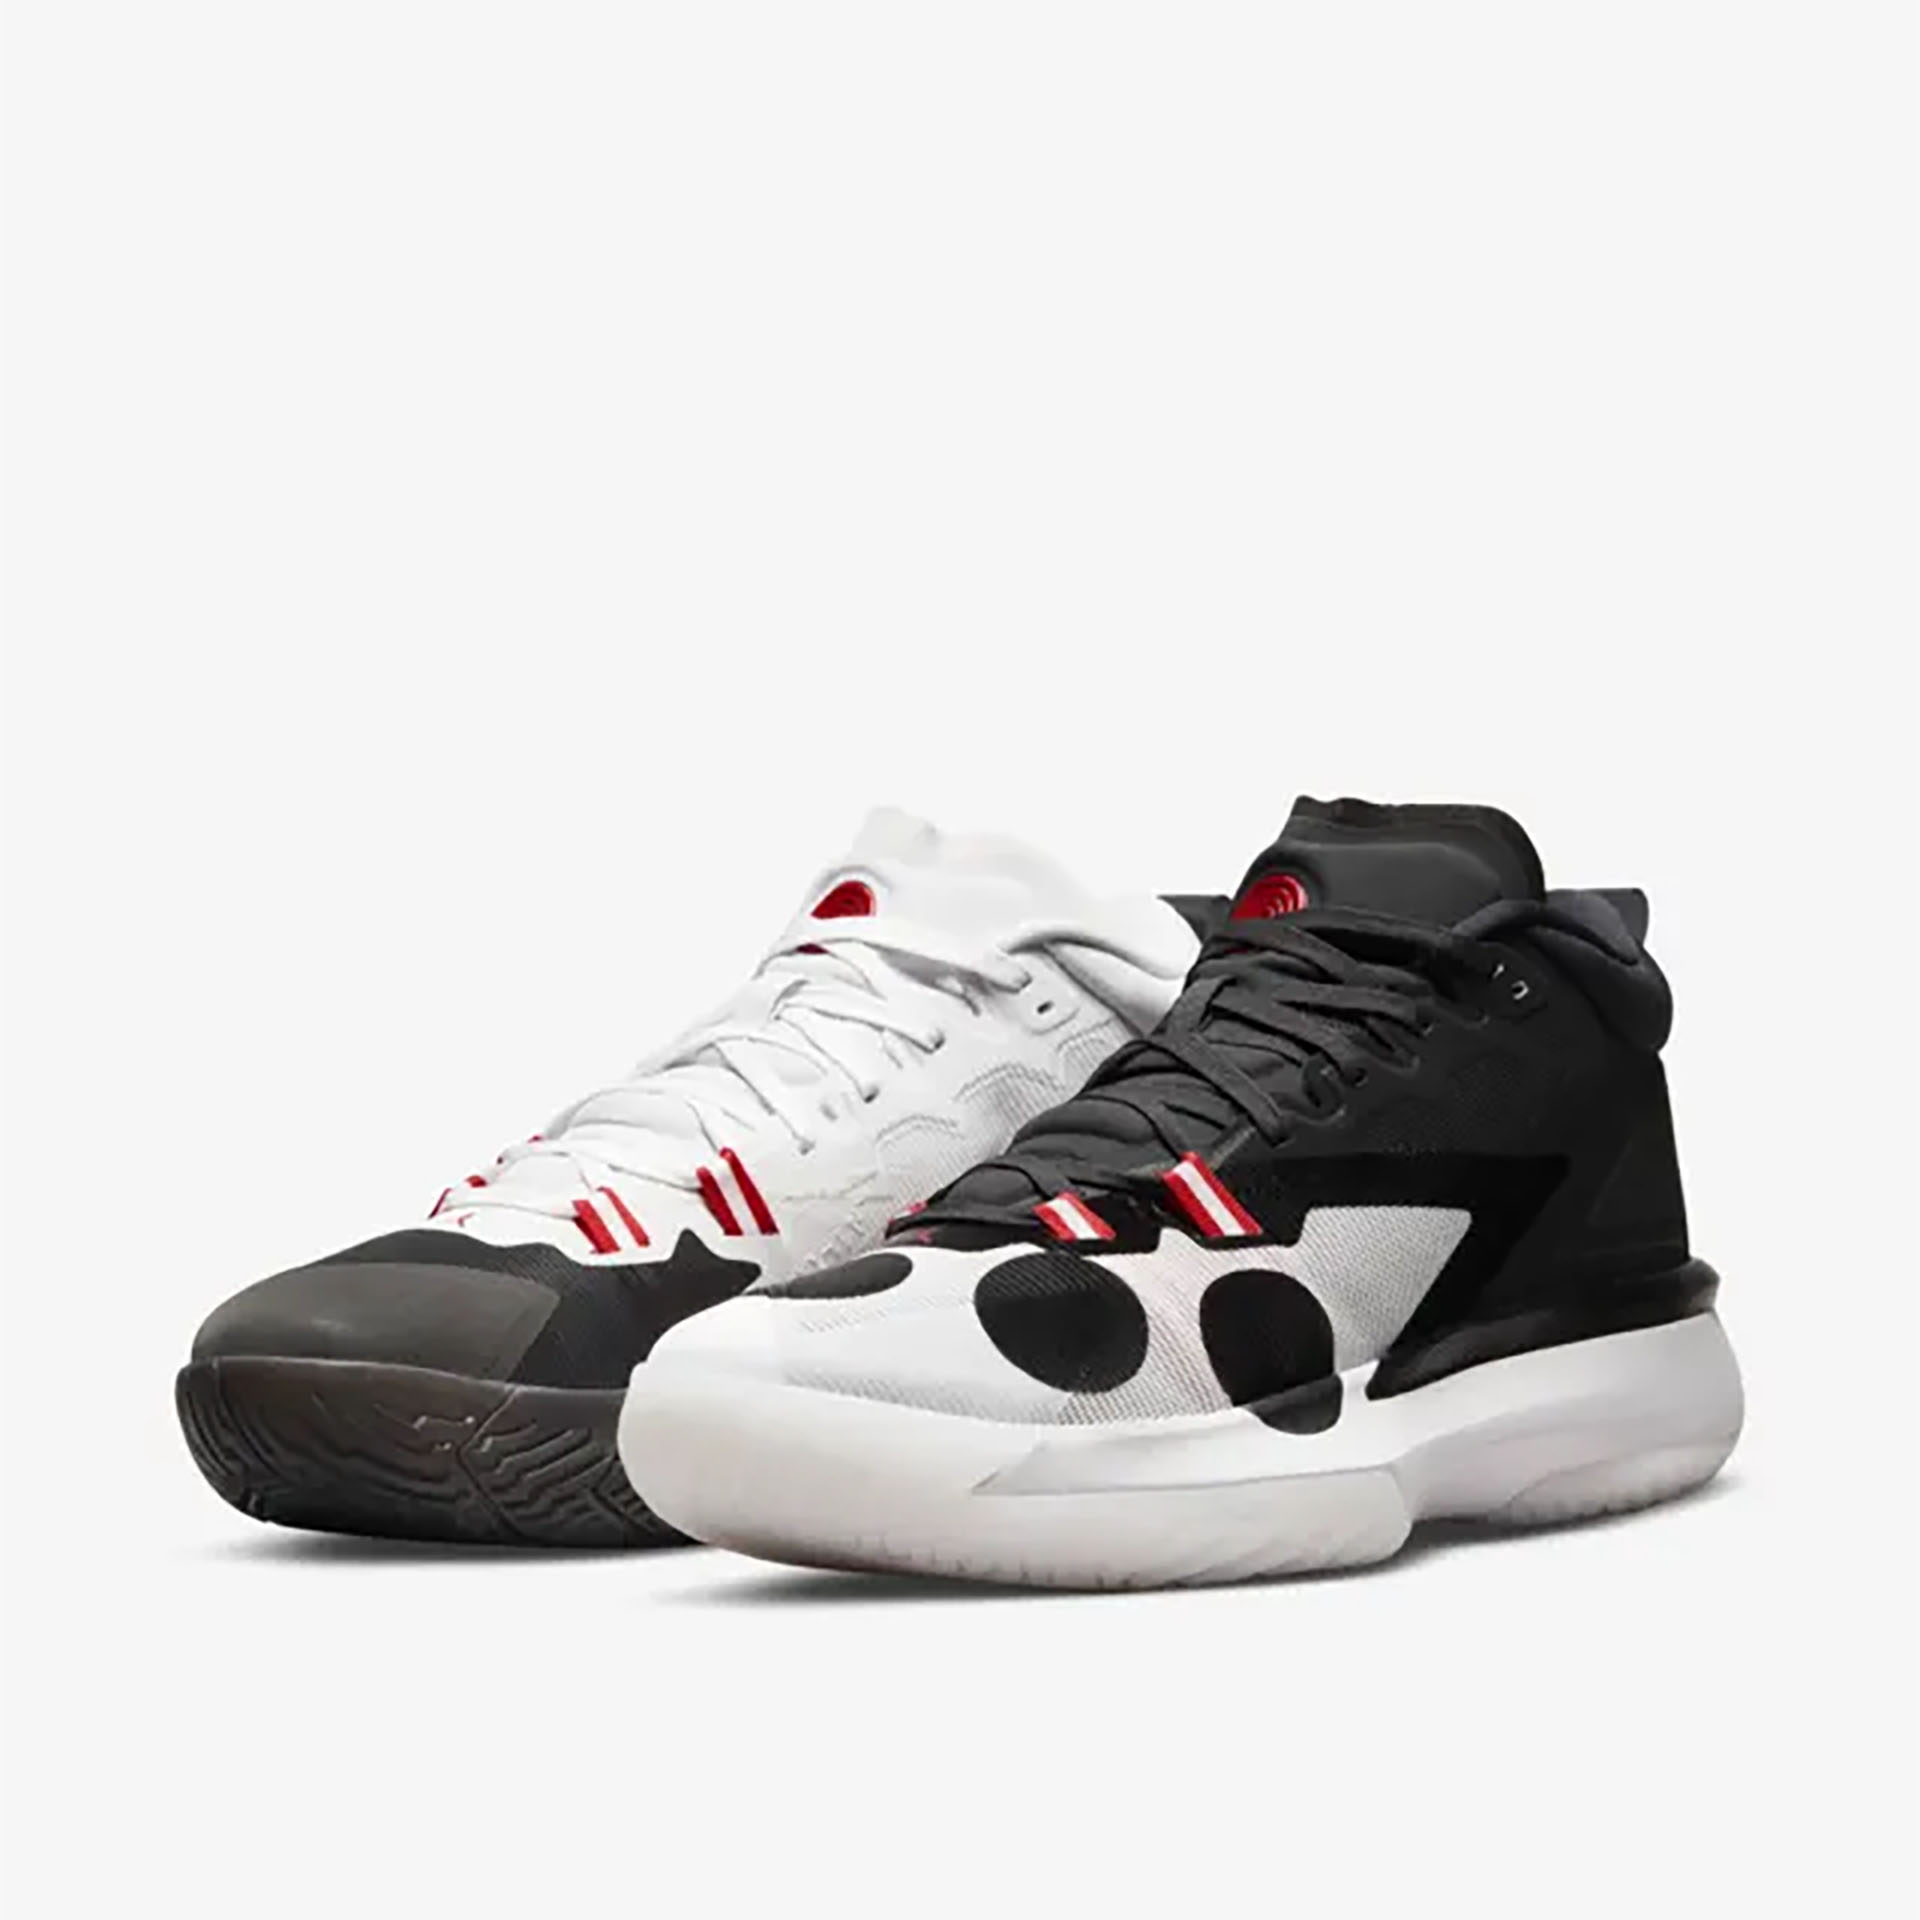 ZION 1 x NARUTO 'White and University Red' ｜ FLY BASKETBALL 